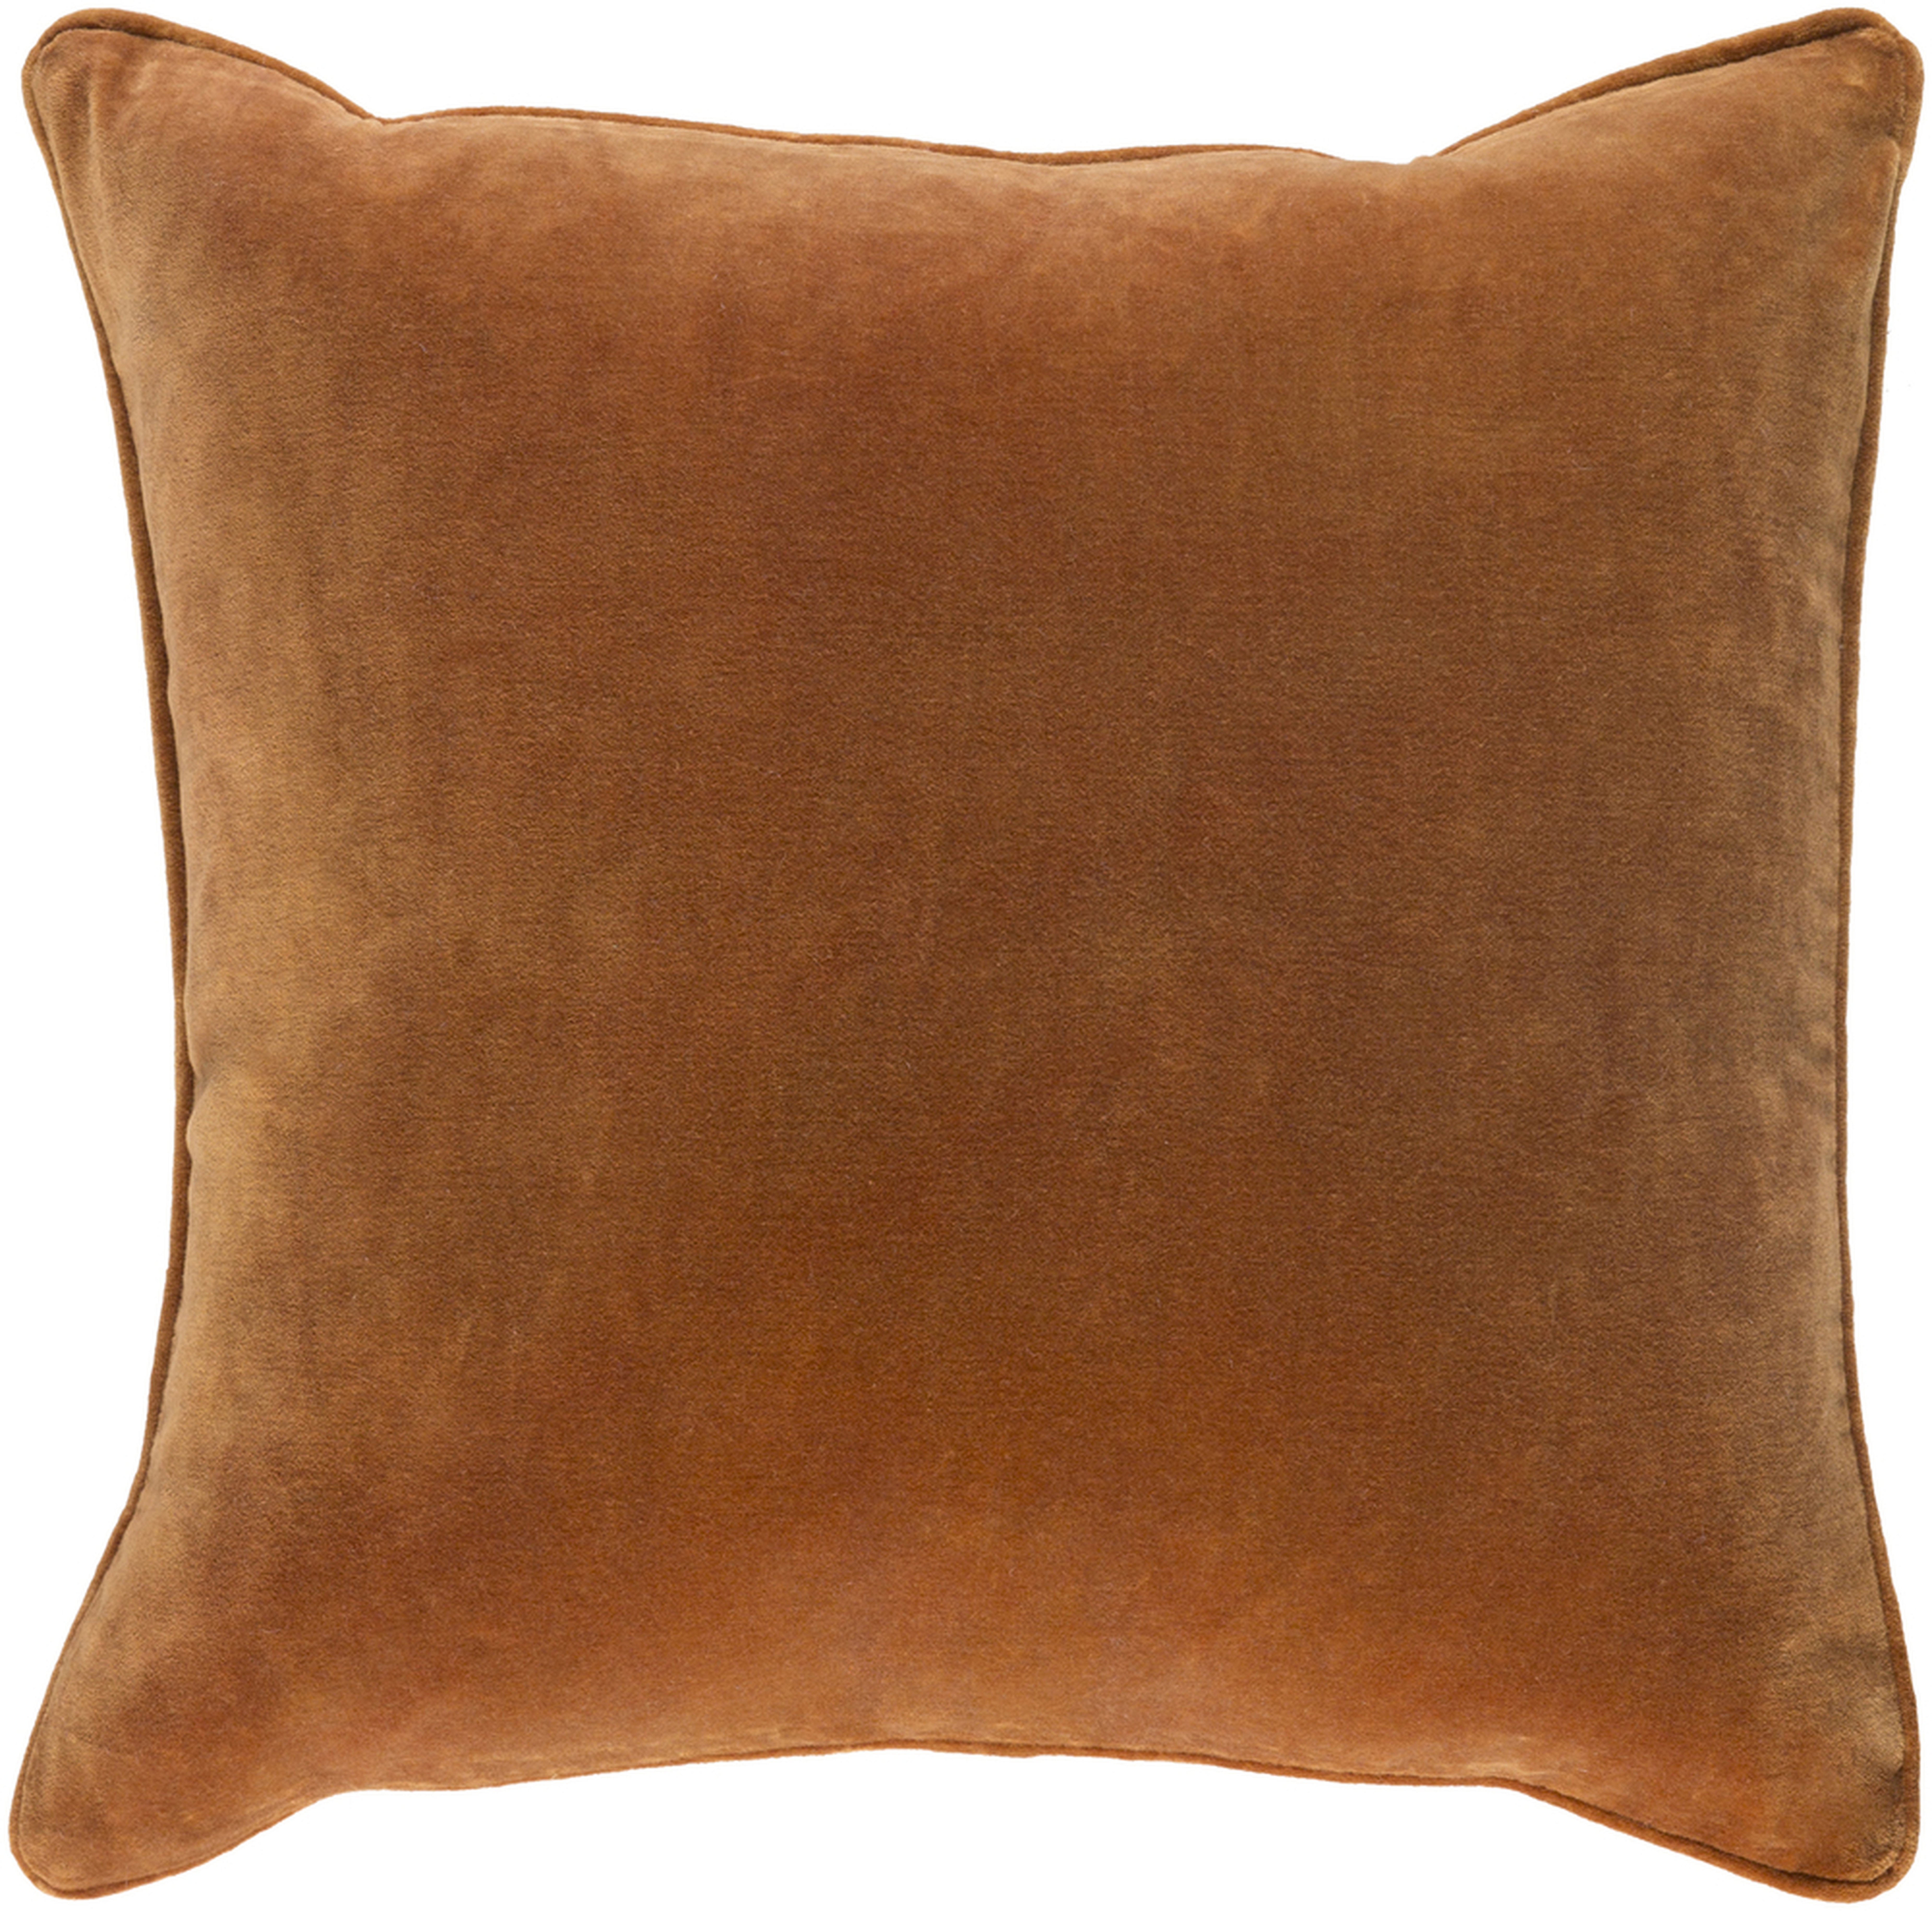 Liam Pillow with Down Fill, Burnt Orange, 18" x 18" - Lulu and Georgia